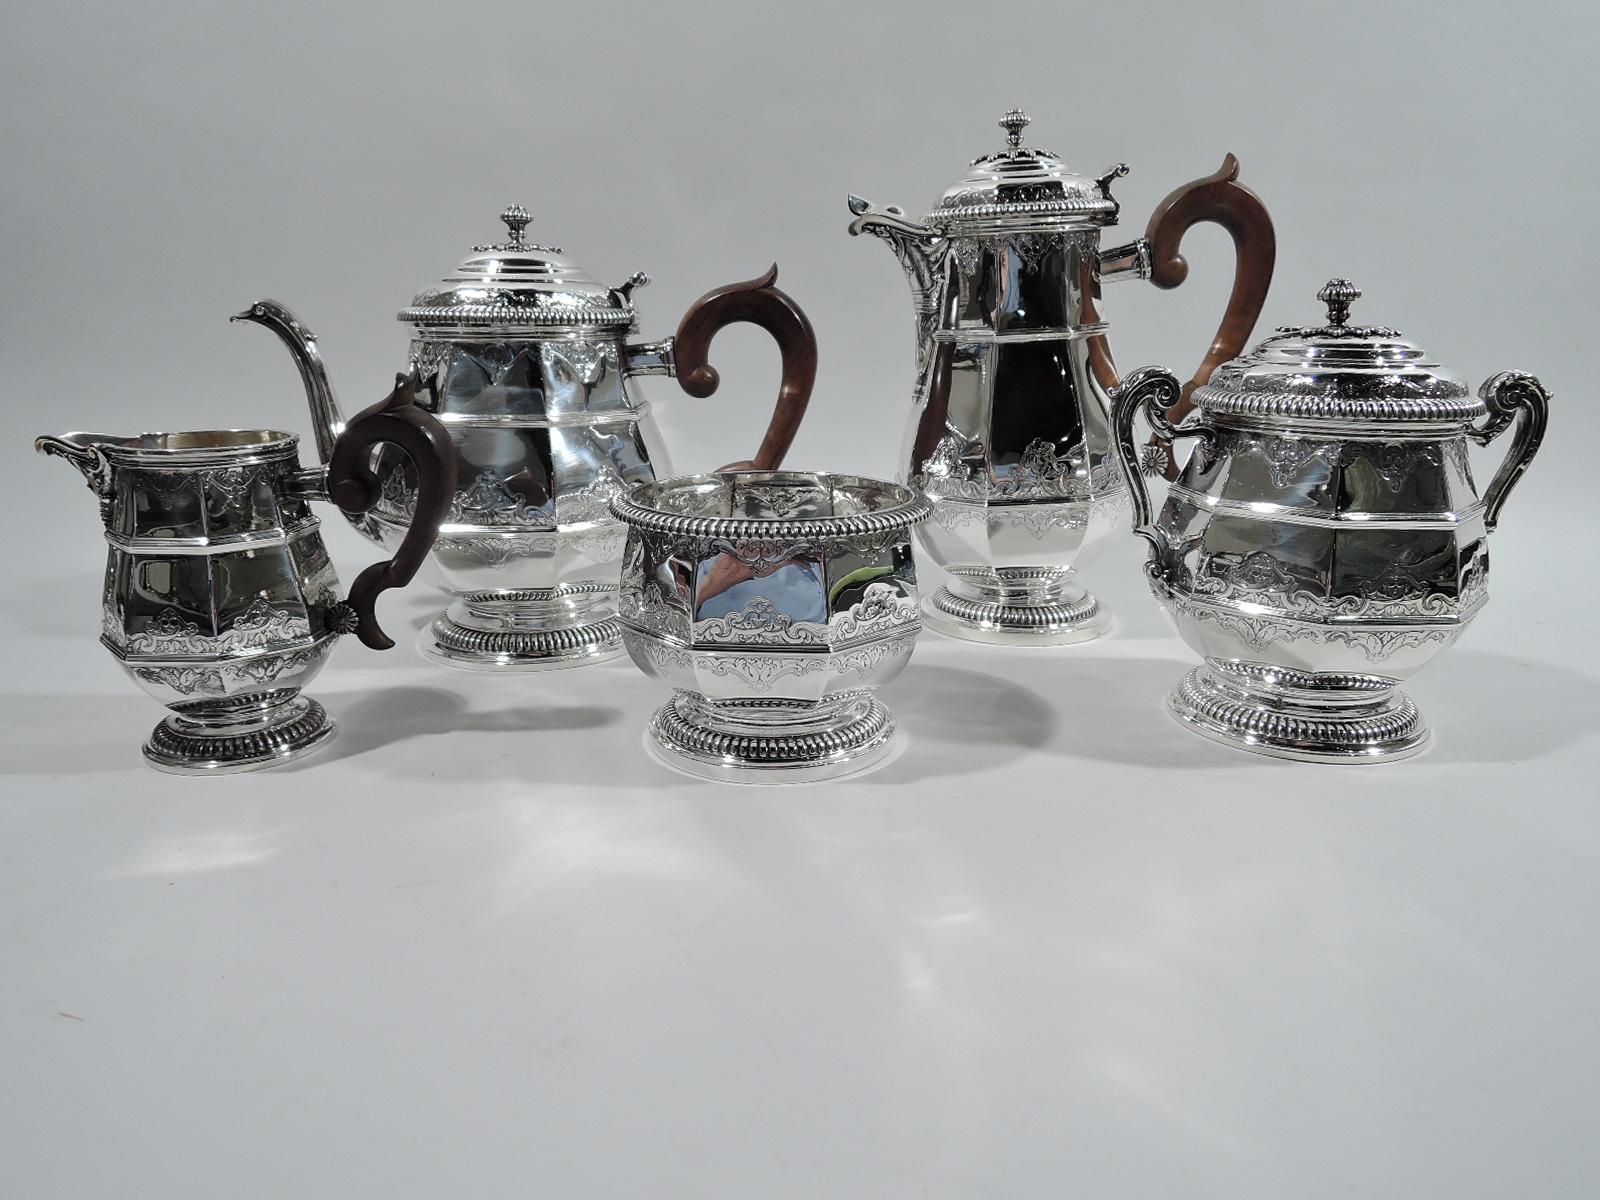 Belle Époque 950 silver coffee and tea set. Made by Emile Puiforcat for Tiffany & Co. in Paris. This set comprises 5 pieces: Coffeepot, teapot, creamer, sugar, and waste bowl. Each: Faceted and girdled upward tapering body on raised foot. Covers